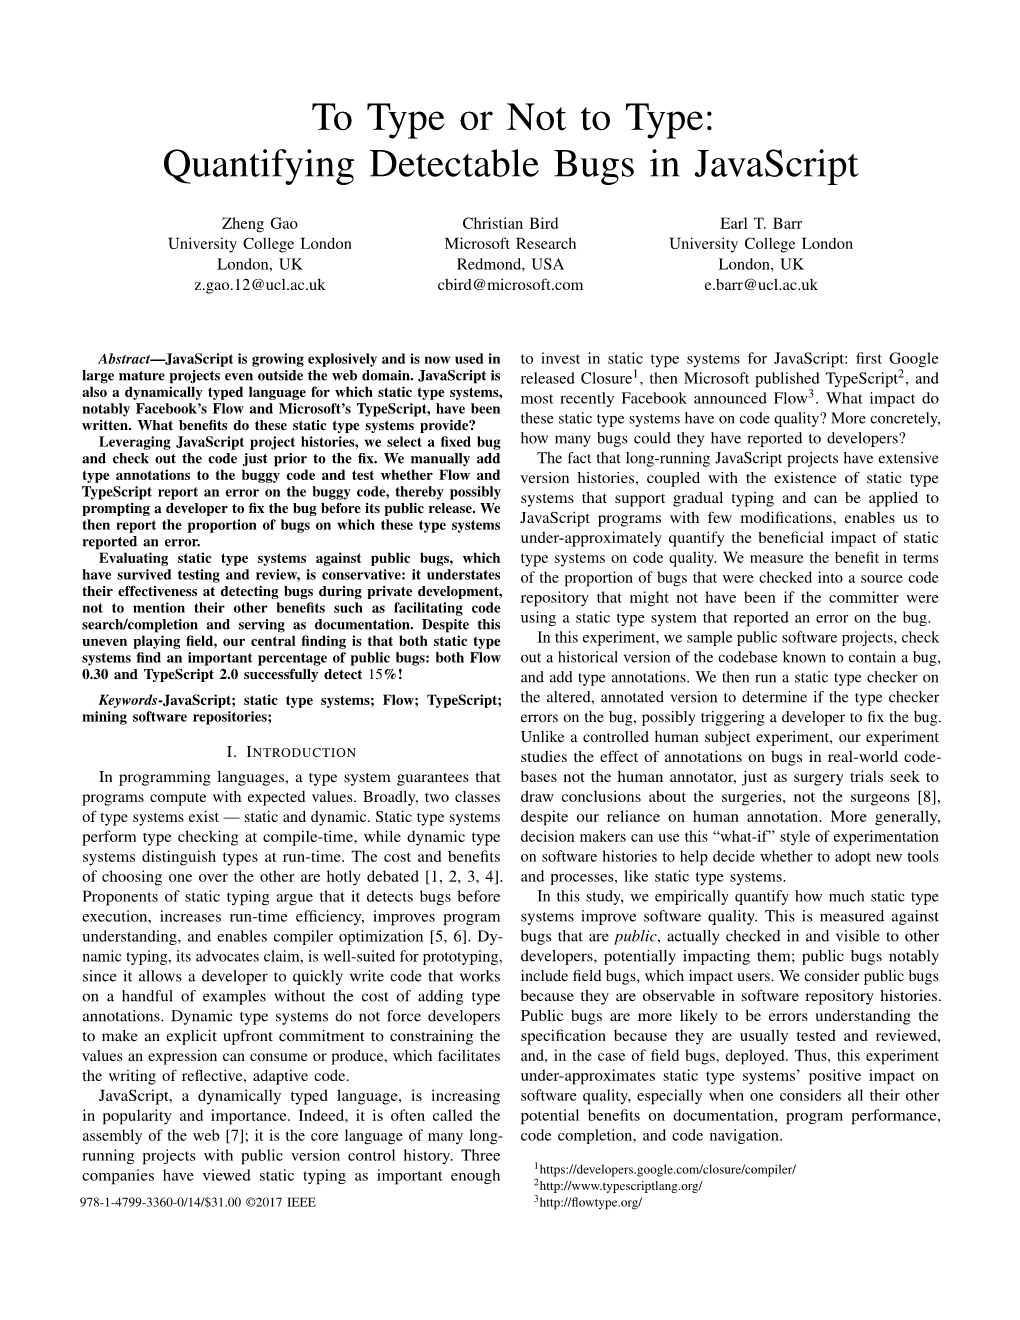 To Type Or Not to Type: Quantifying Detectable Bugs in Javascript